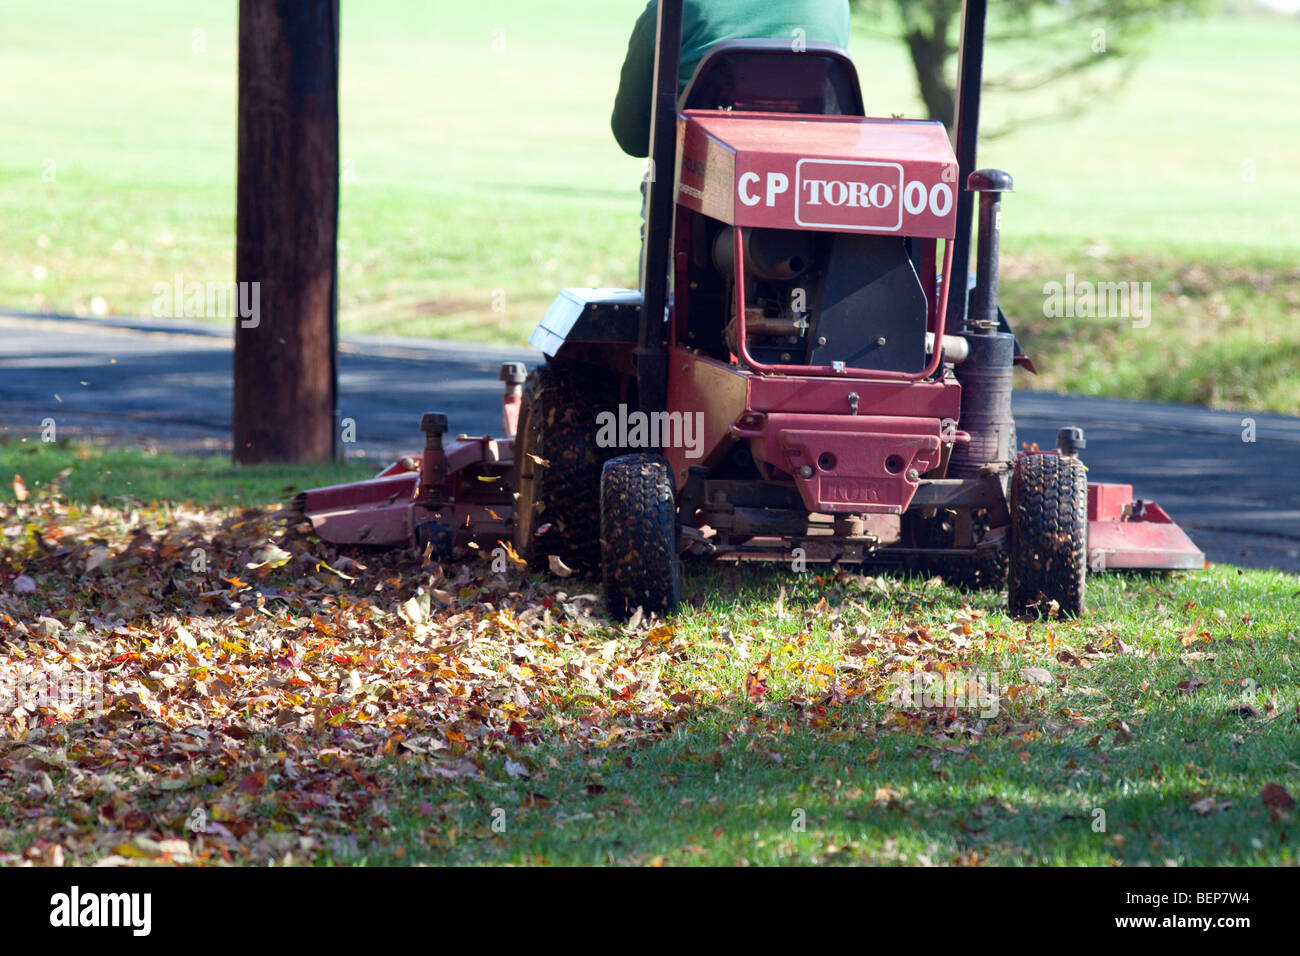 A grounds keeper mowing with a large toro mower. Mulching leaves. Stock Photo